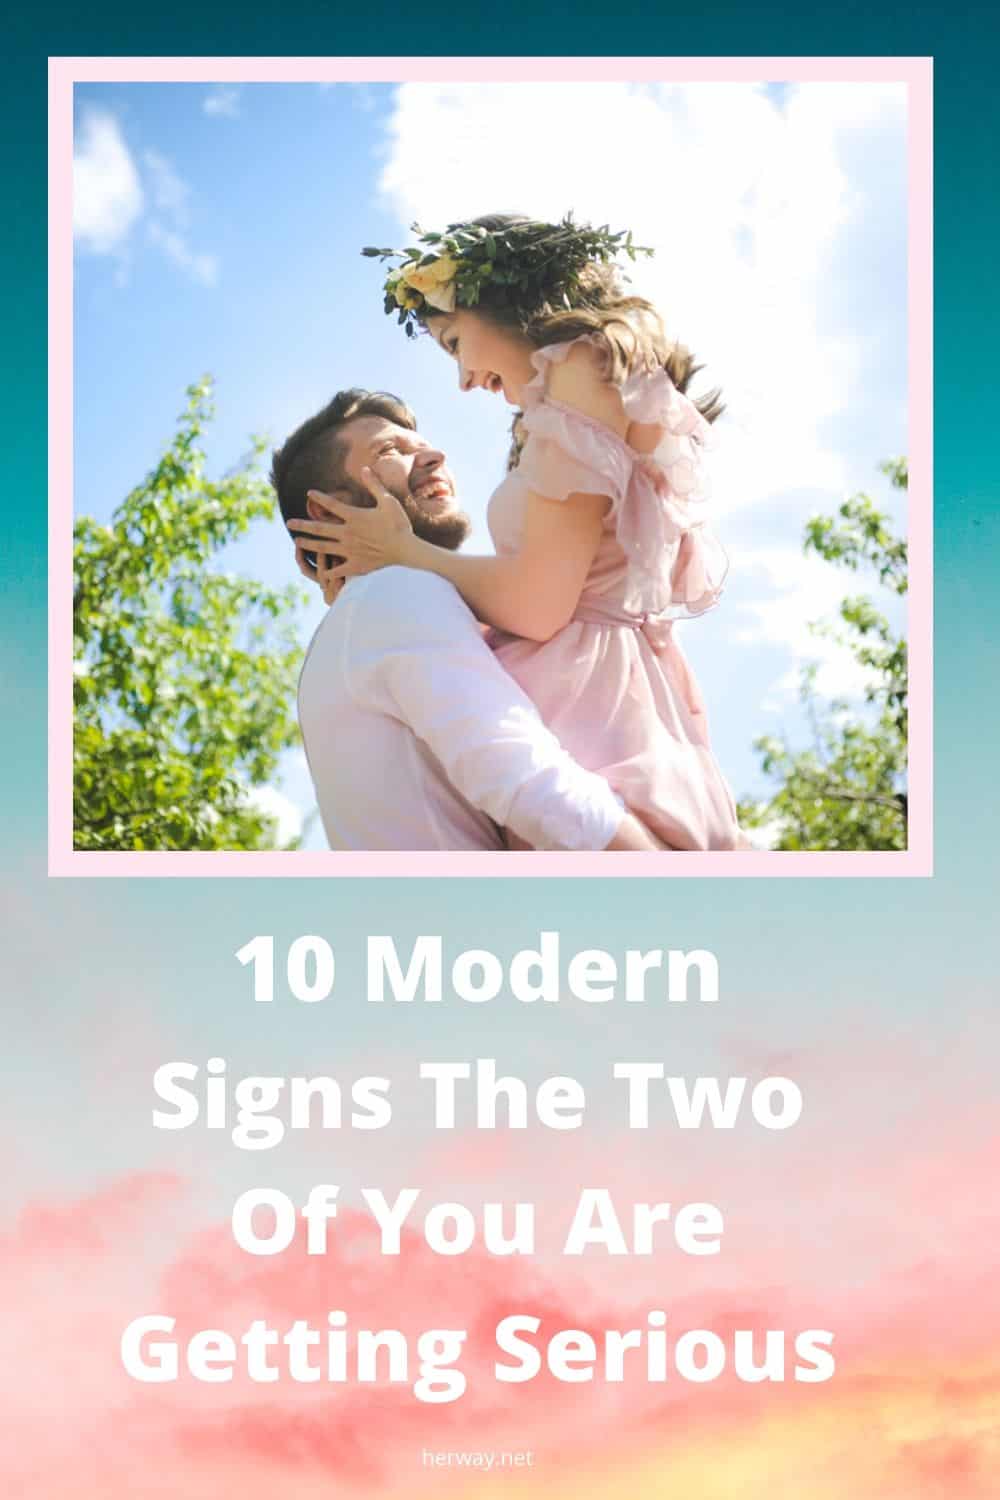 10 Modern Signs The Two Of You Are Getting Serious